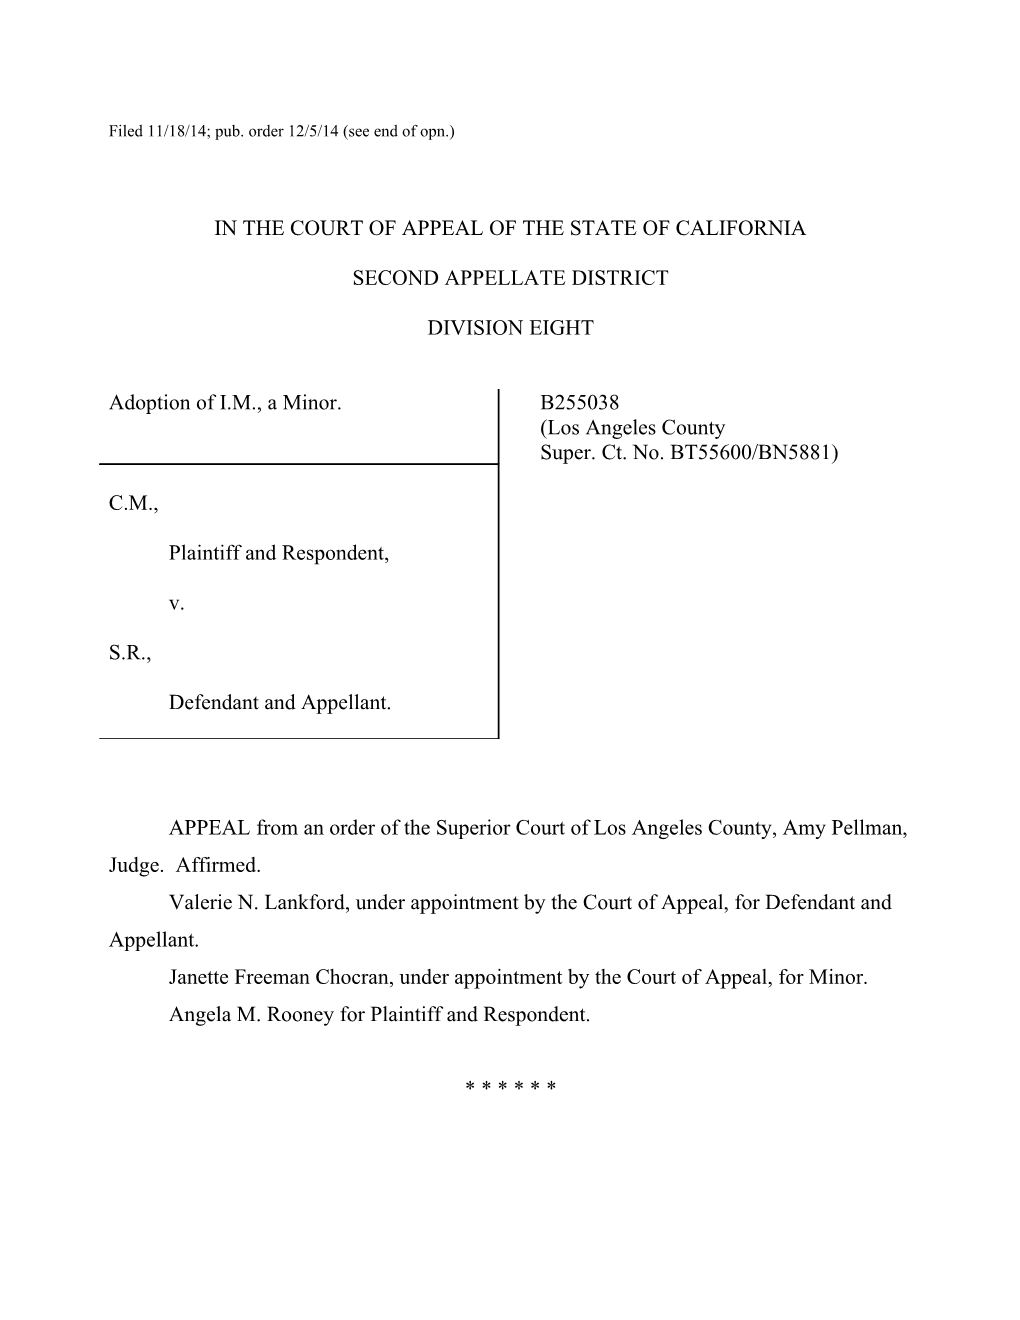 Filed 11/18/14; Pub. Order 12/5/14 (See End of Opn.)